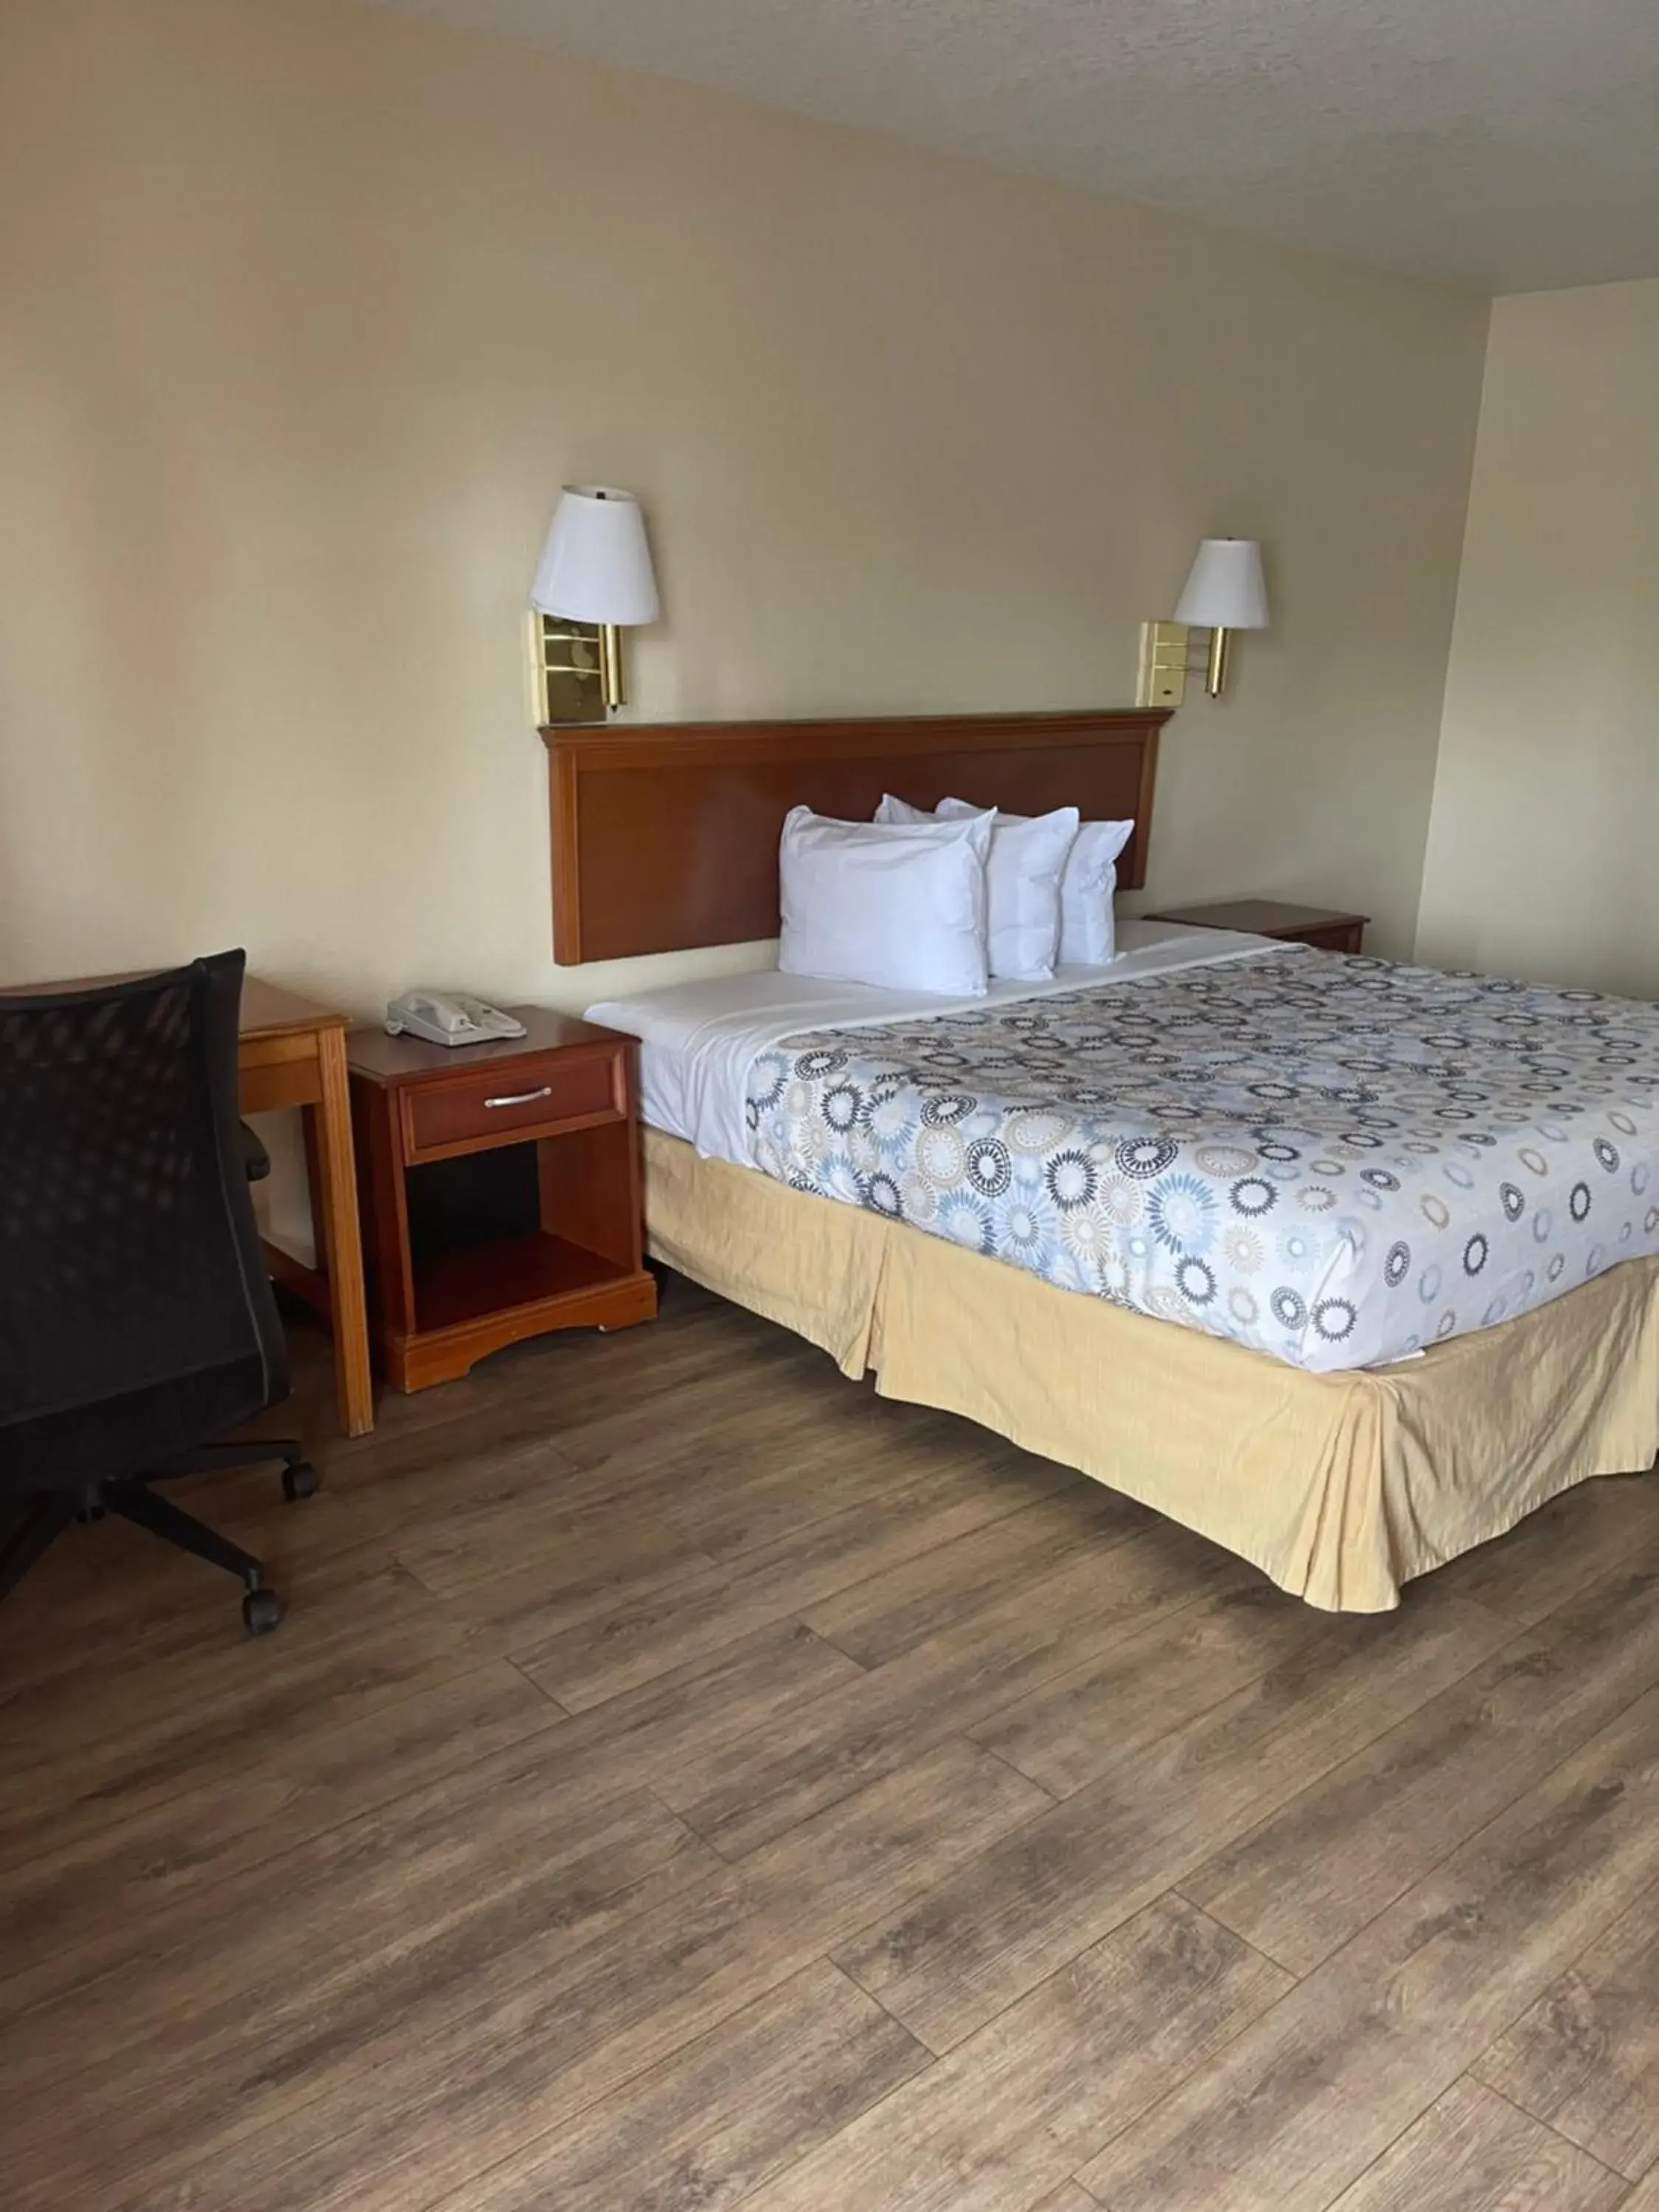 Bedroom, Bed in Hole Inn the Wall Hotel - Sunset Plaza - Fort Walton Beach